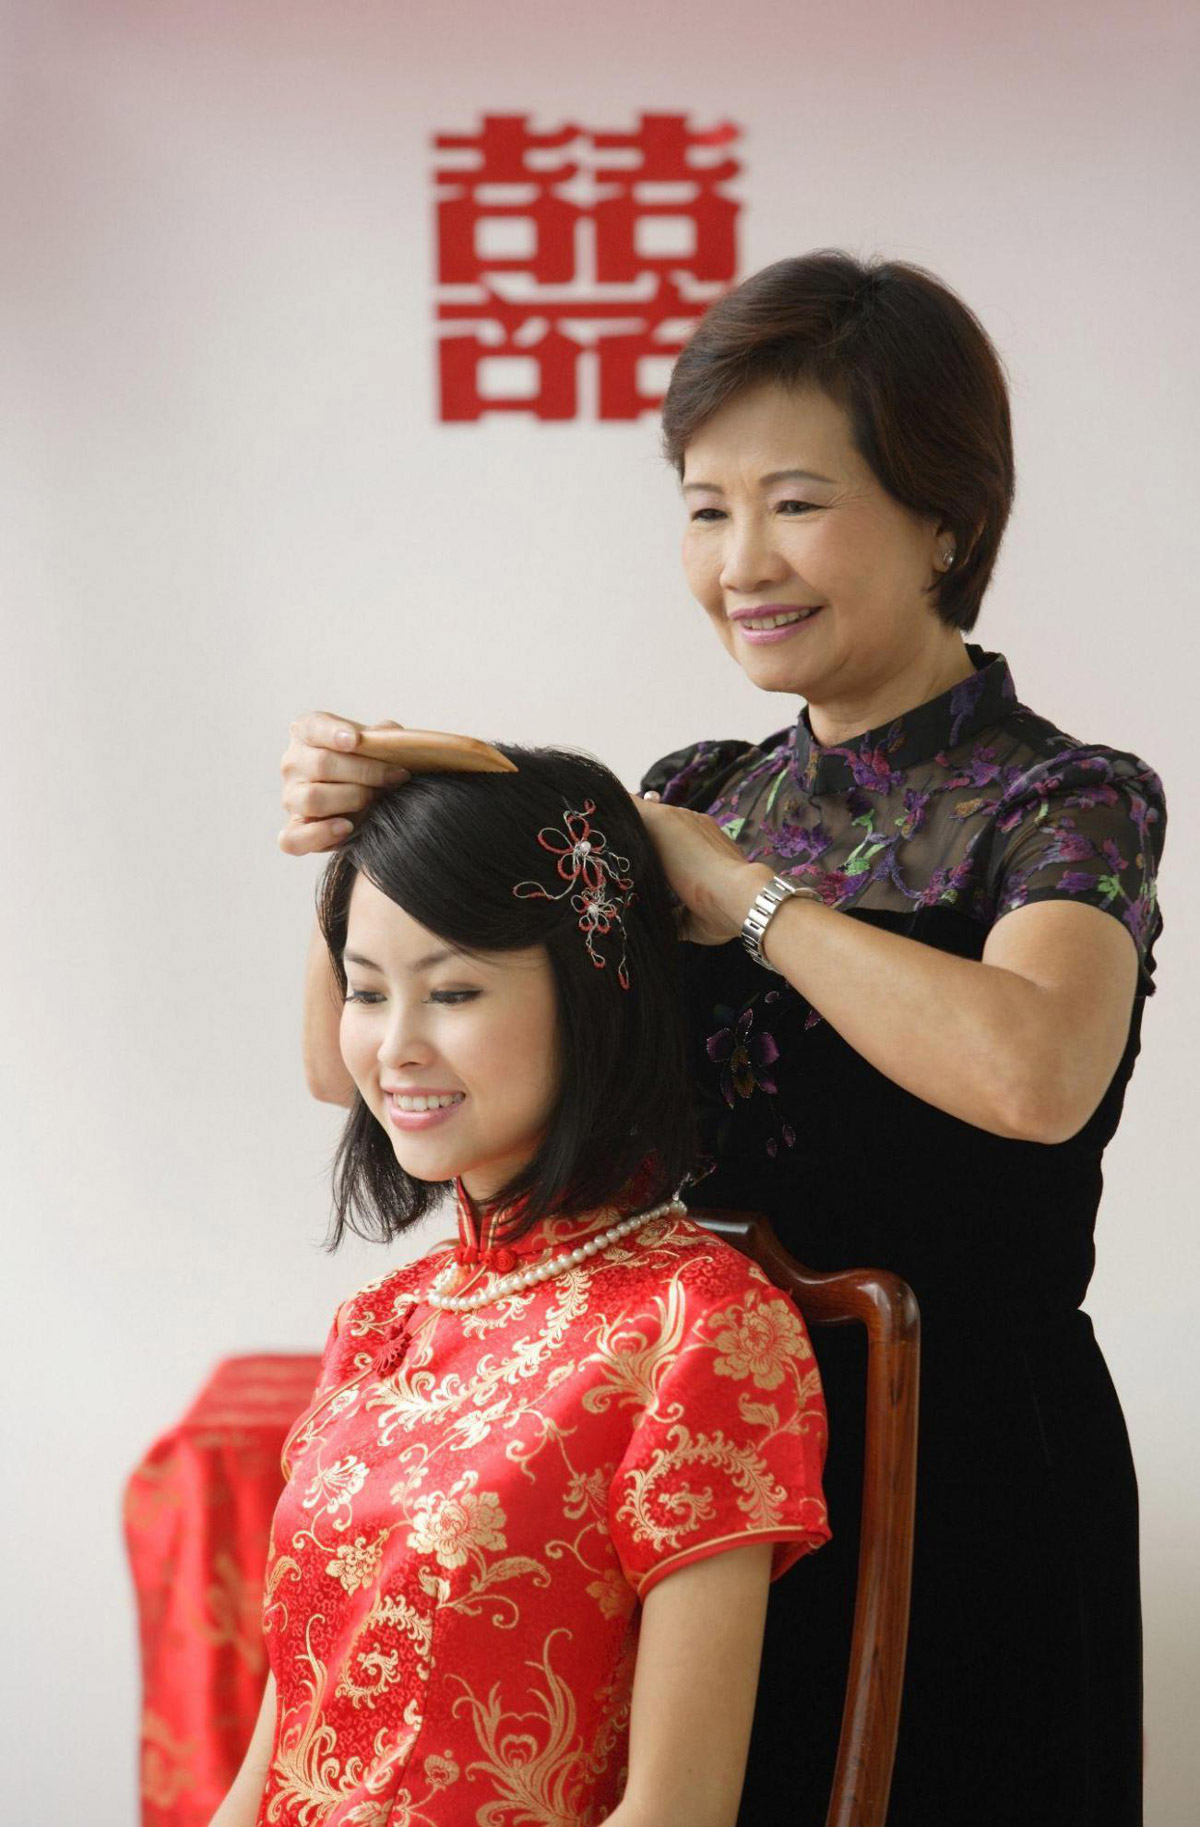 The Chinese Wedding Shop: A Traditional Wedding For the Modern Bride